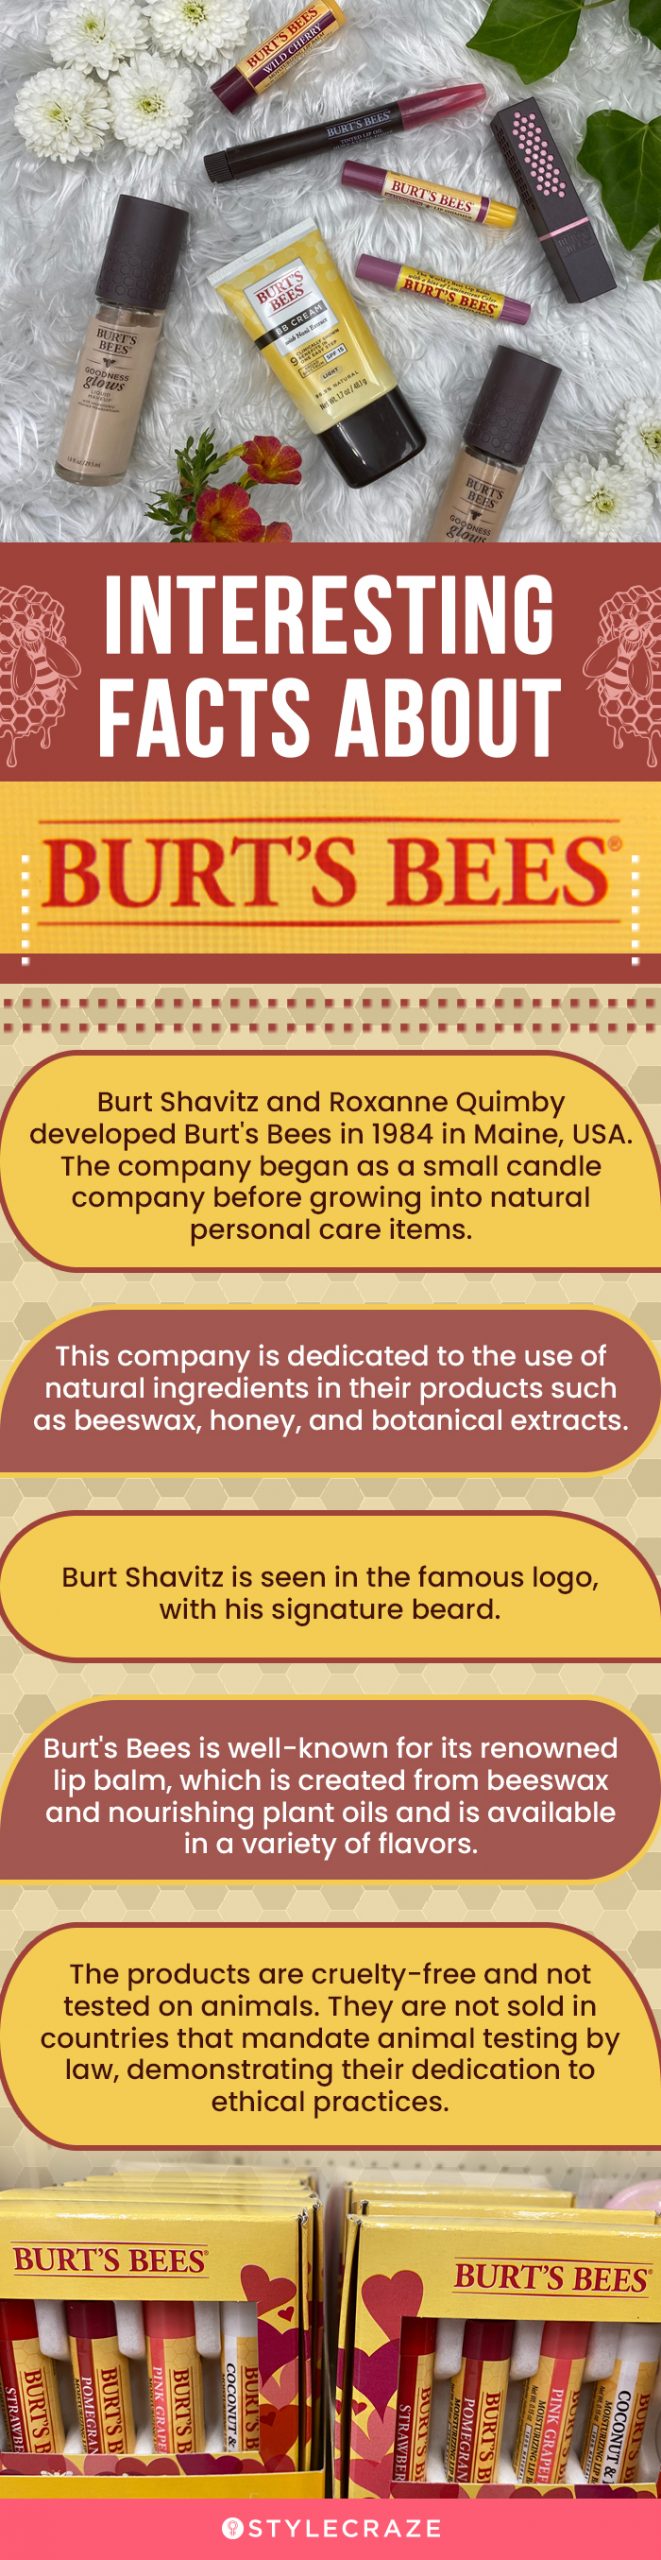 Interesting Facts About Burt’s Bees (infographic)